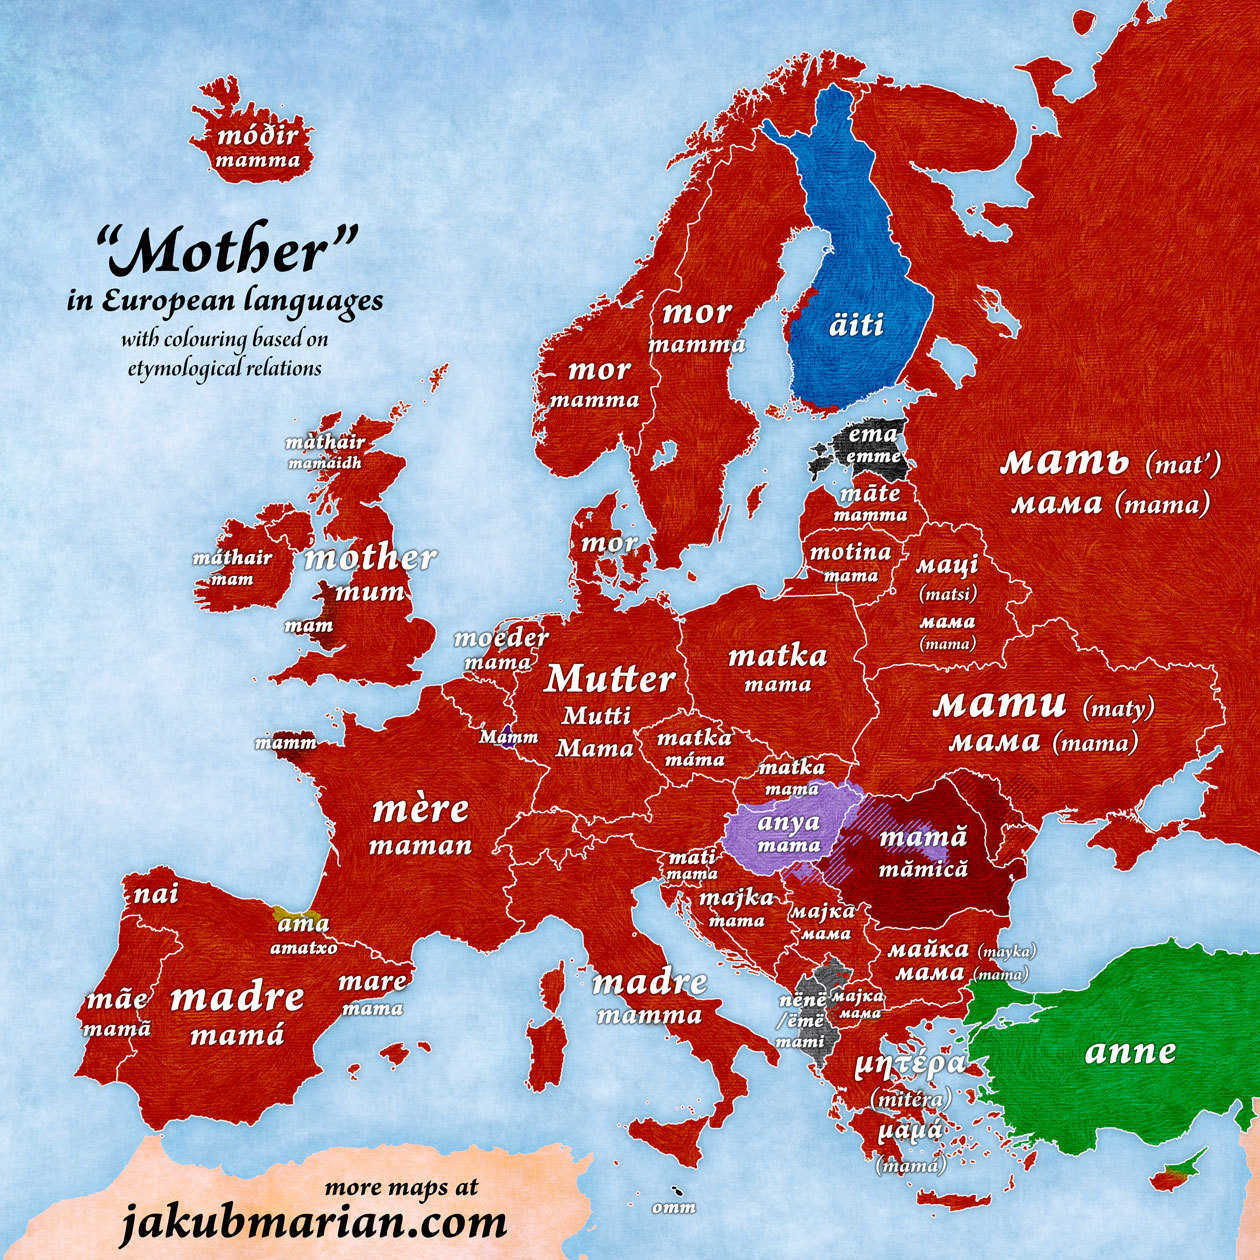 thats-so-meme: mapsontheweb: “Mother” in European languages. In Morocco, Algeria